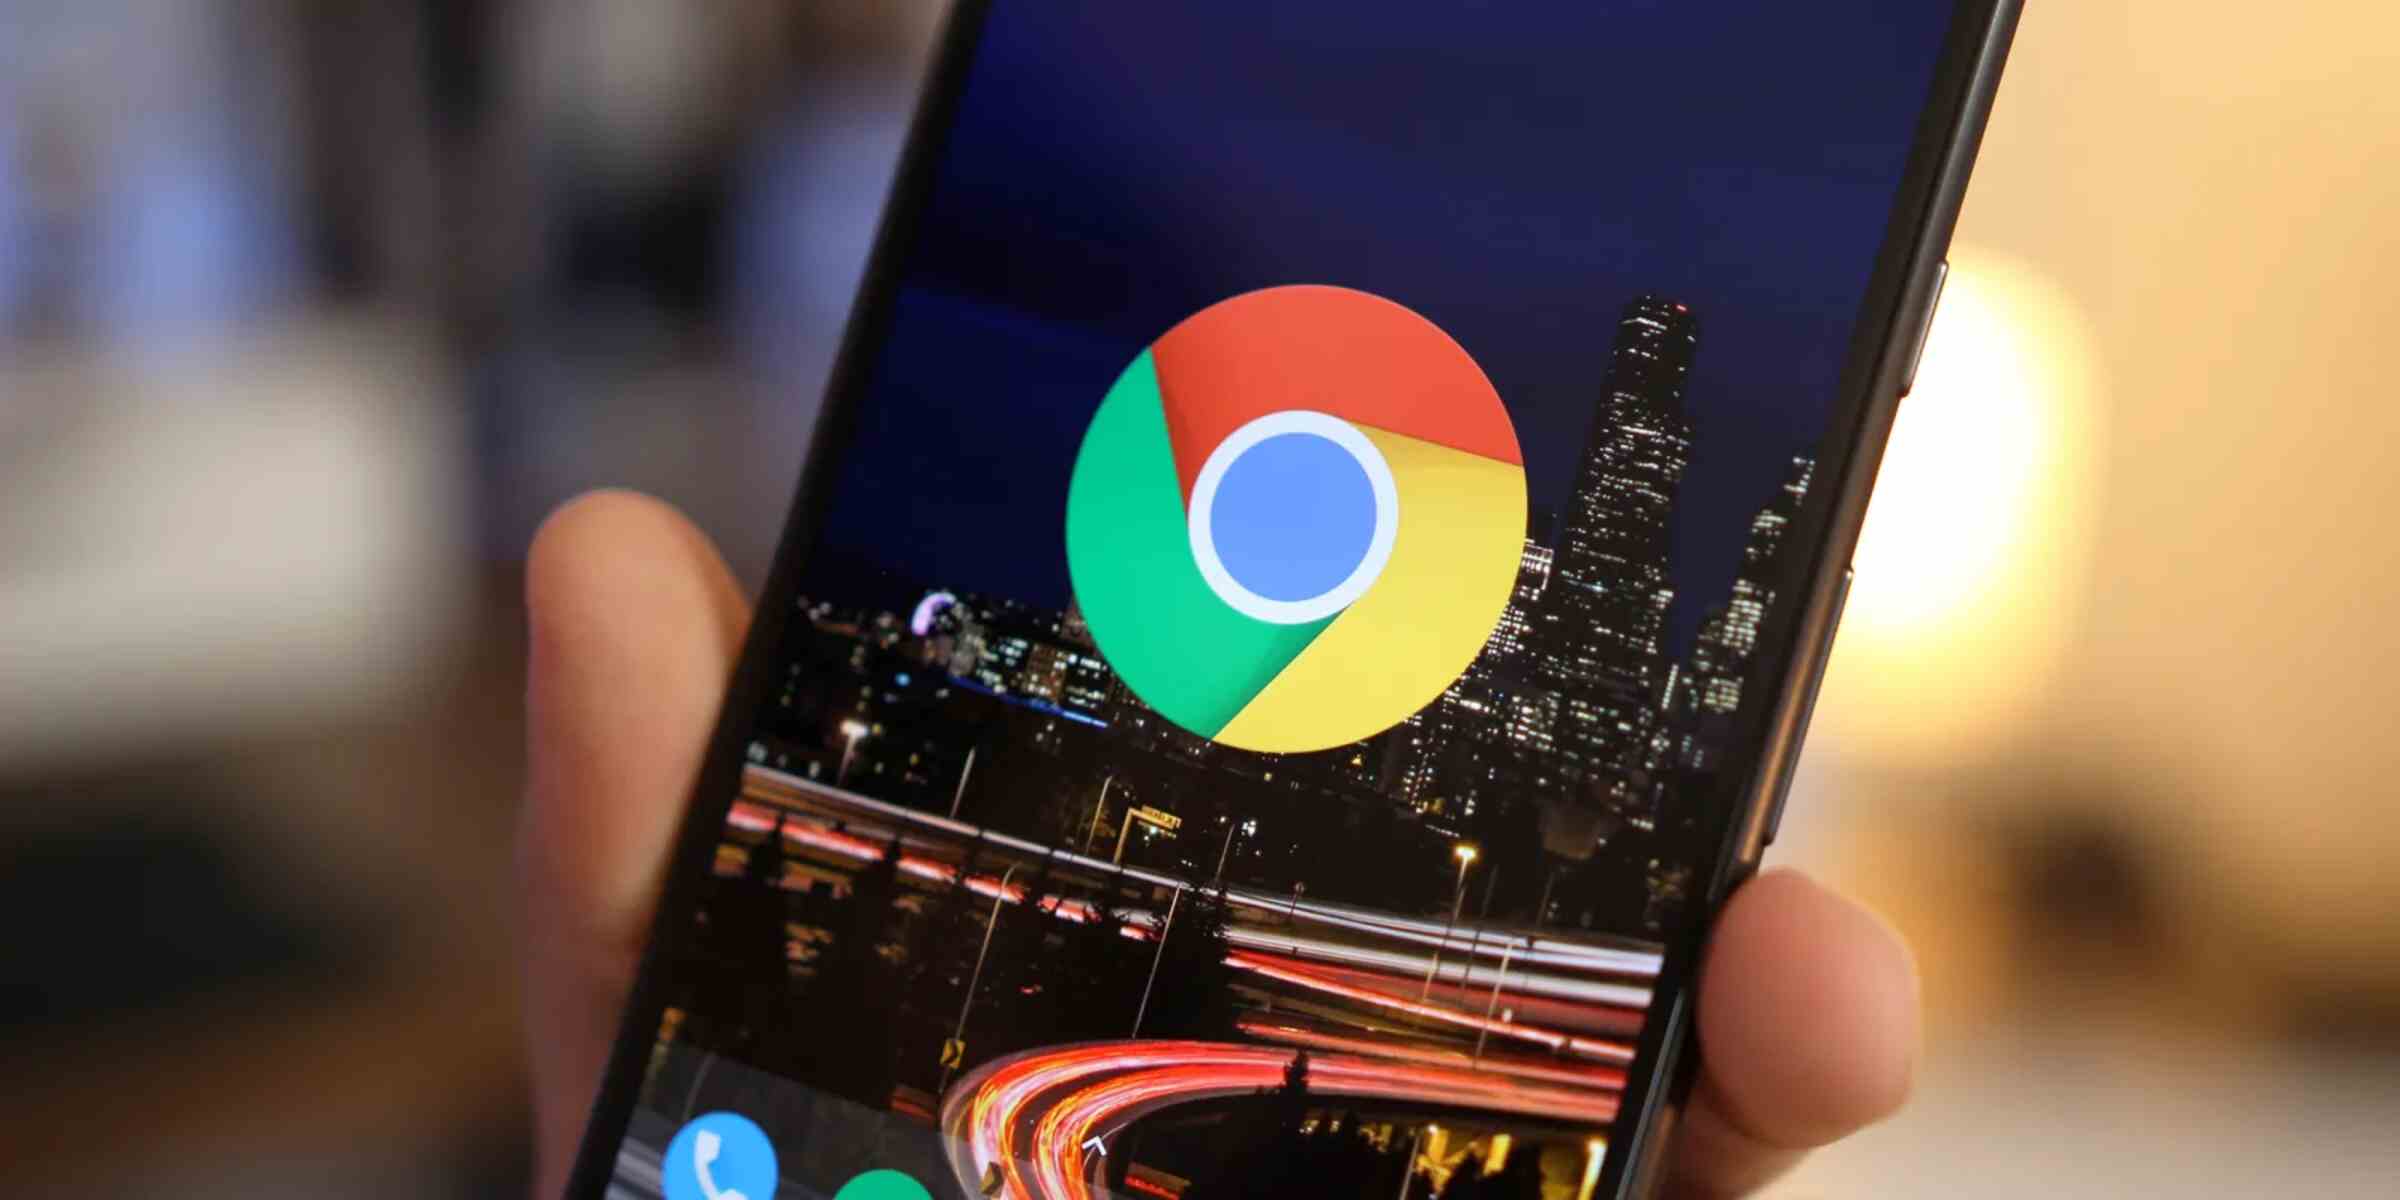 How To Change Chrome Tab Layout